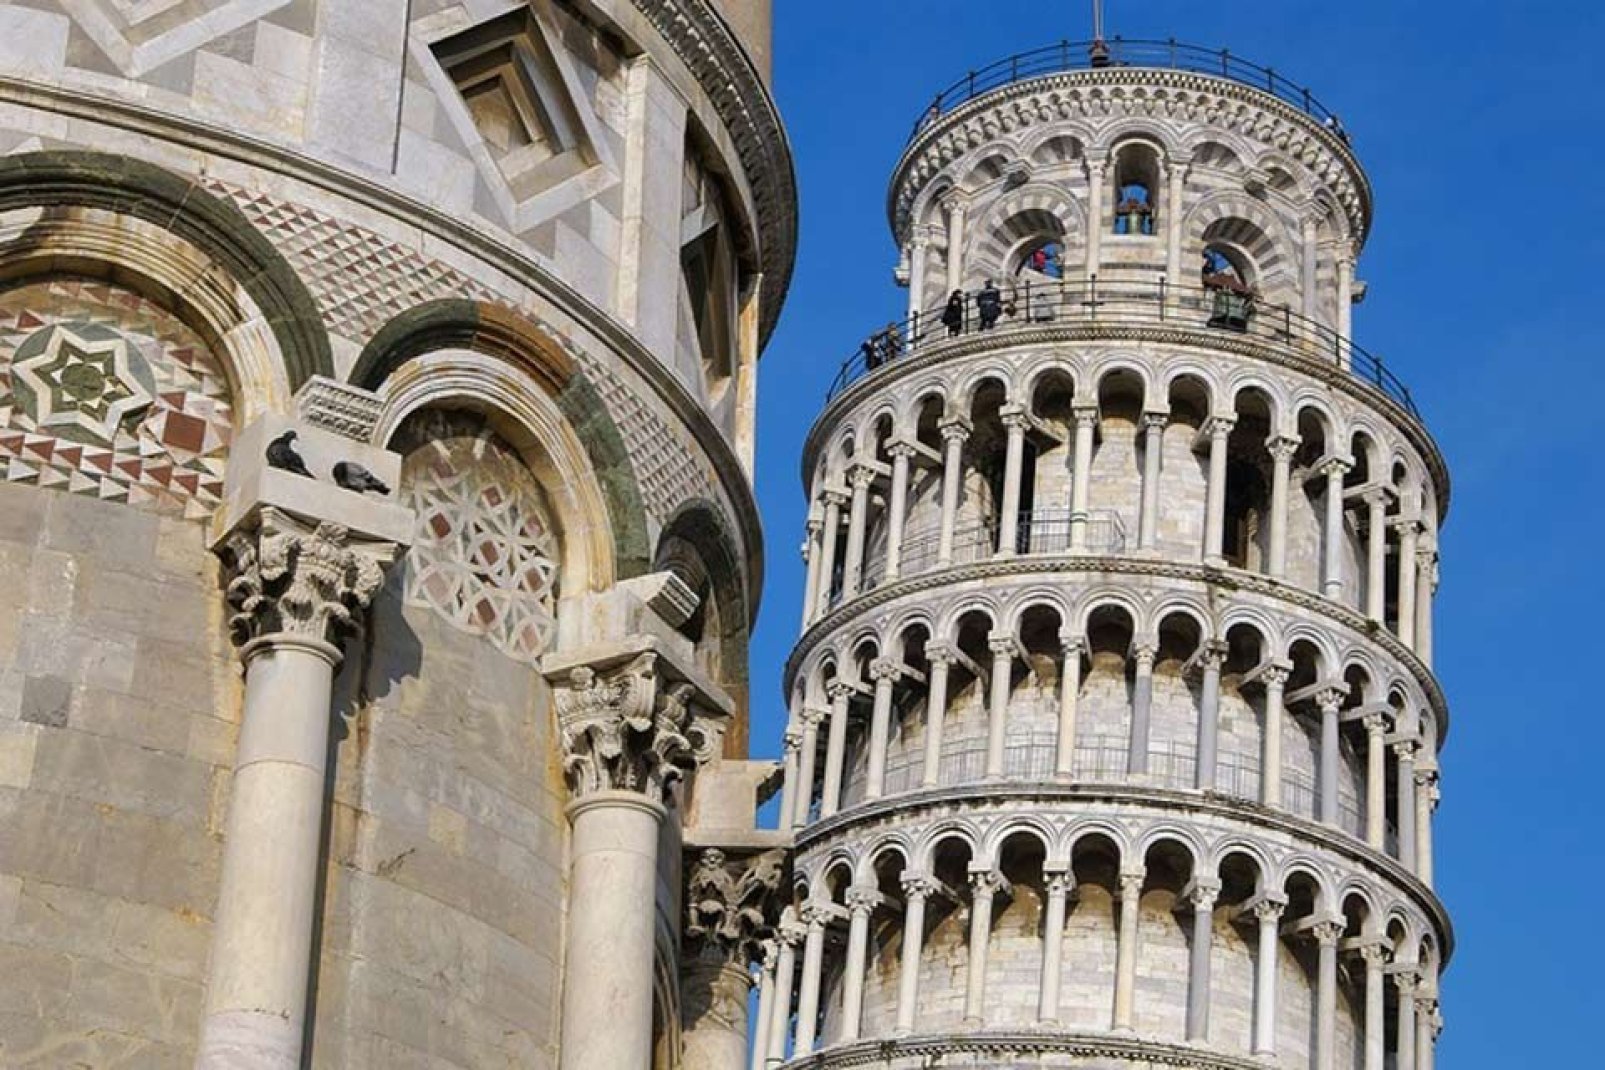 Pisa's belfry, more popularly known as the Leaning Tower of Pisa, is known worldwide for the sharp angle on which it leans.